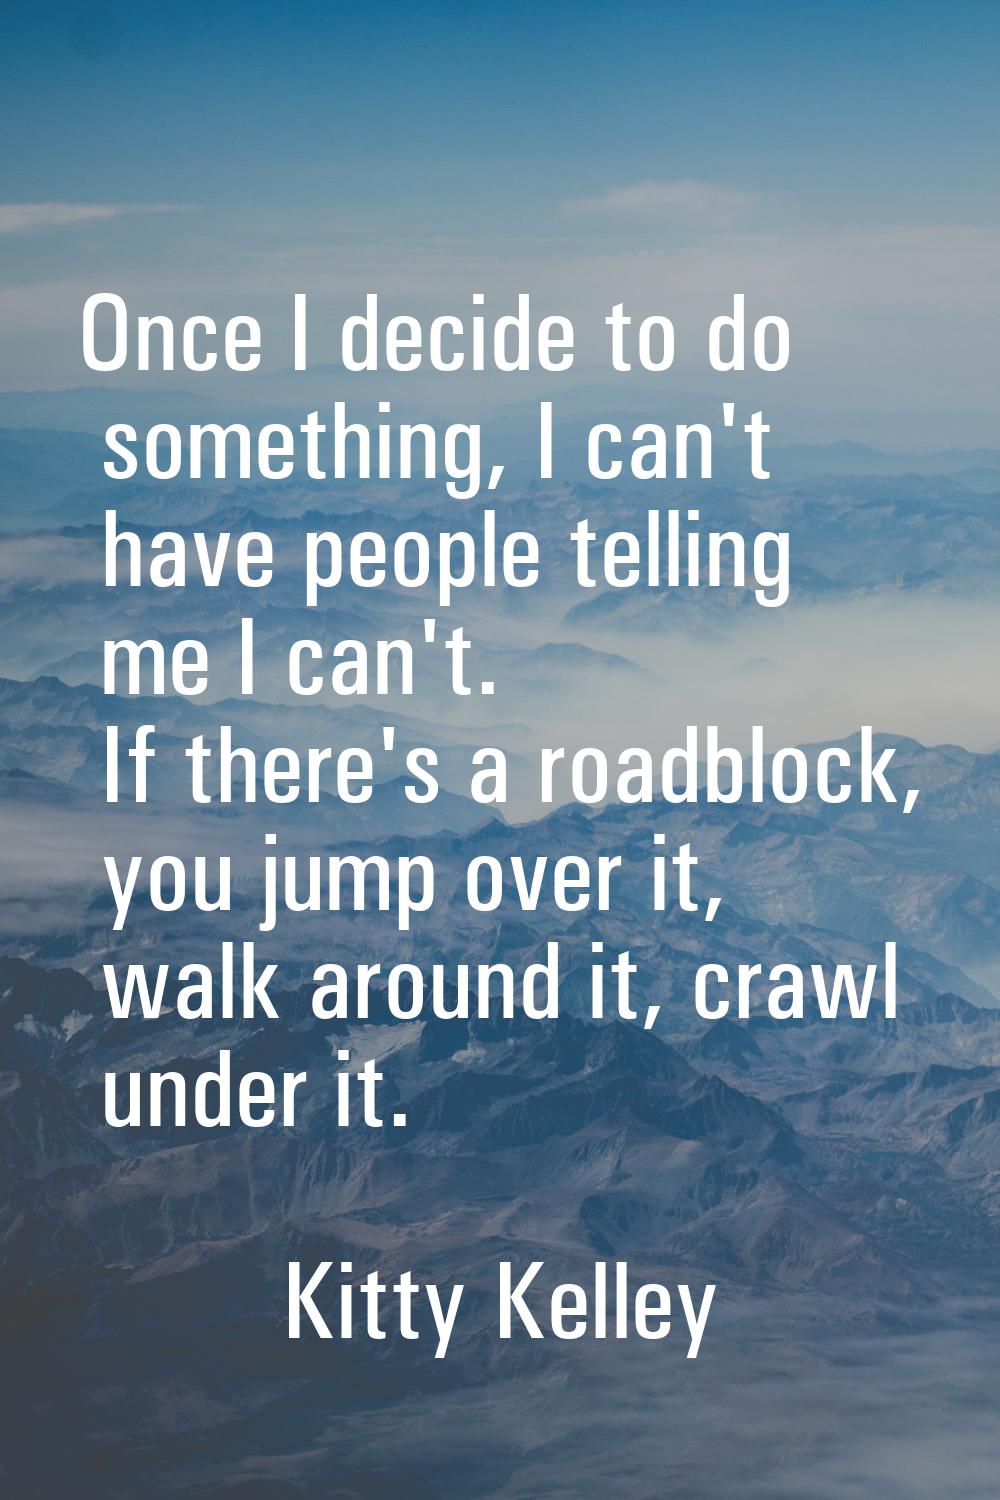 Once I decide to do something, I can't have people telling me I can't. If there's a roadblock, you 